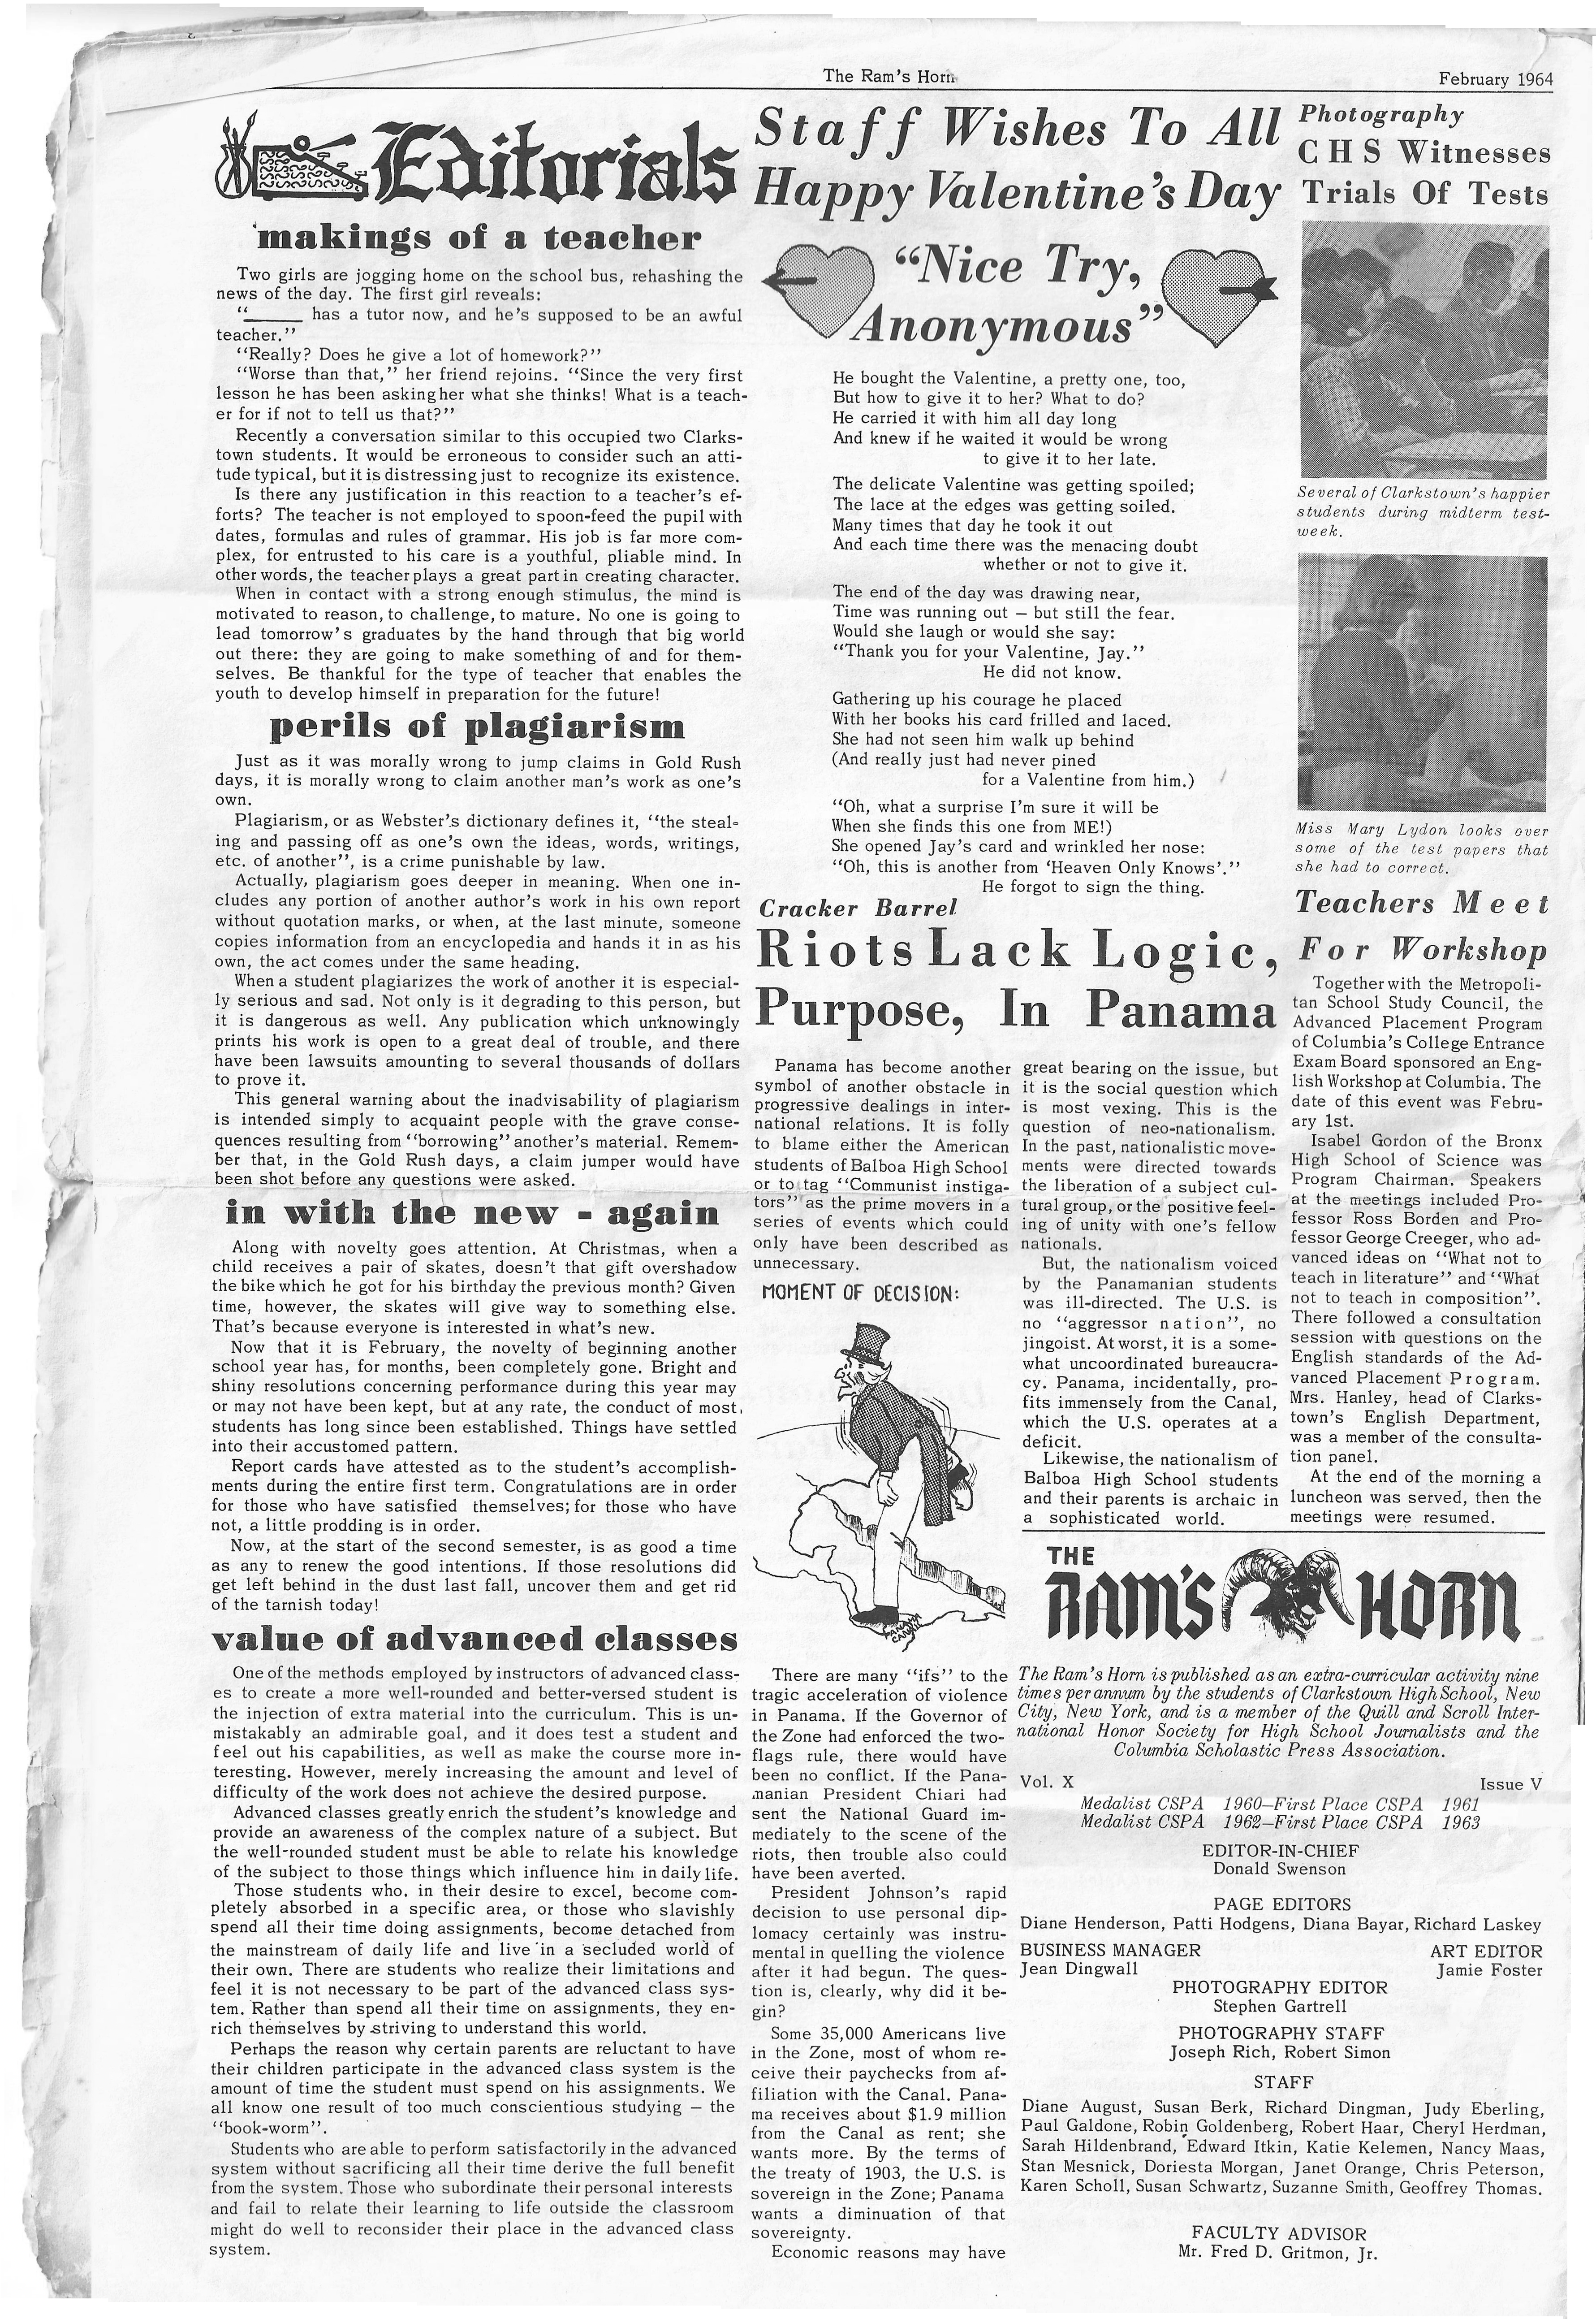 The Ram's Horn - Feb. '64 - Page 2